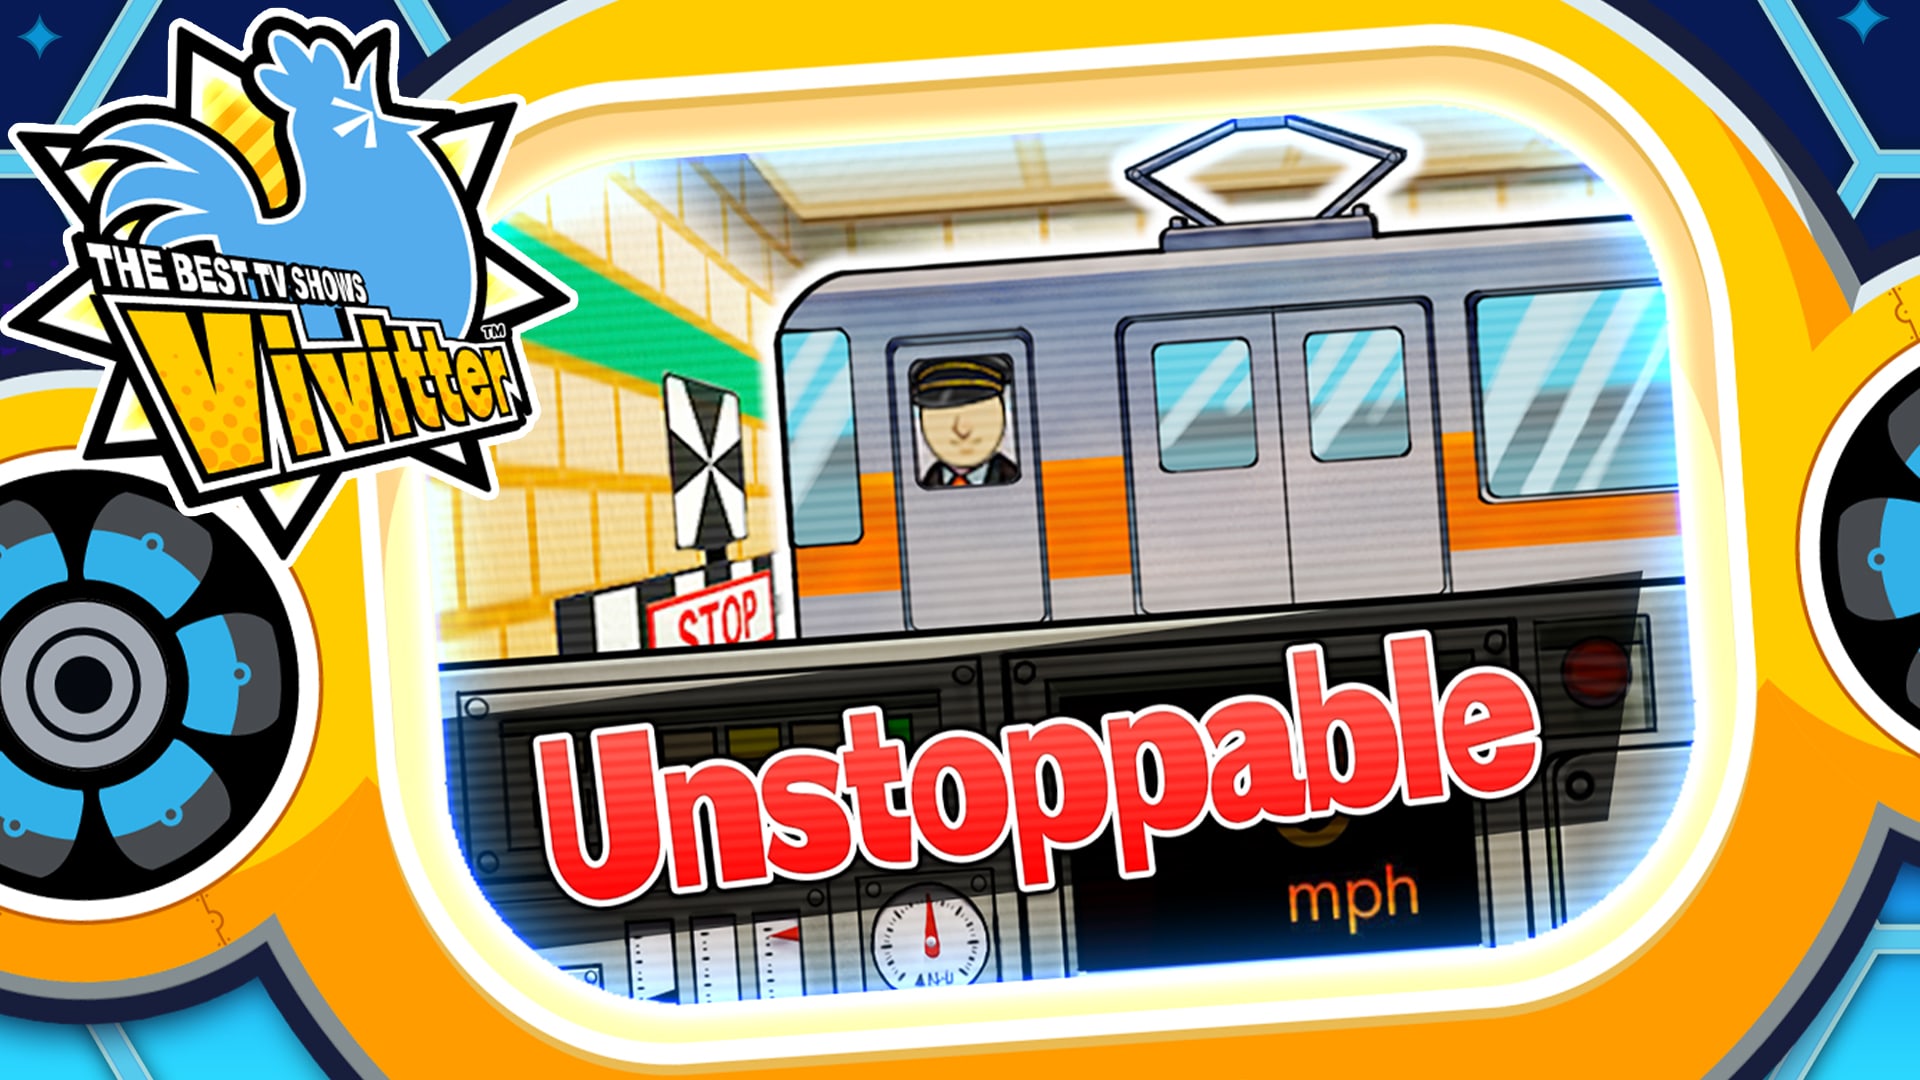 Additional mini-game "Unstoppable"